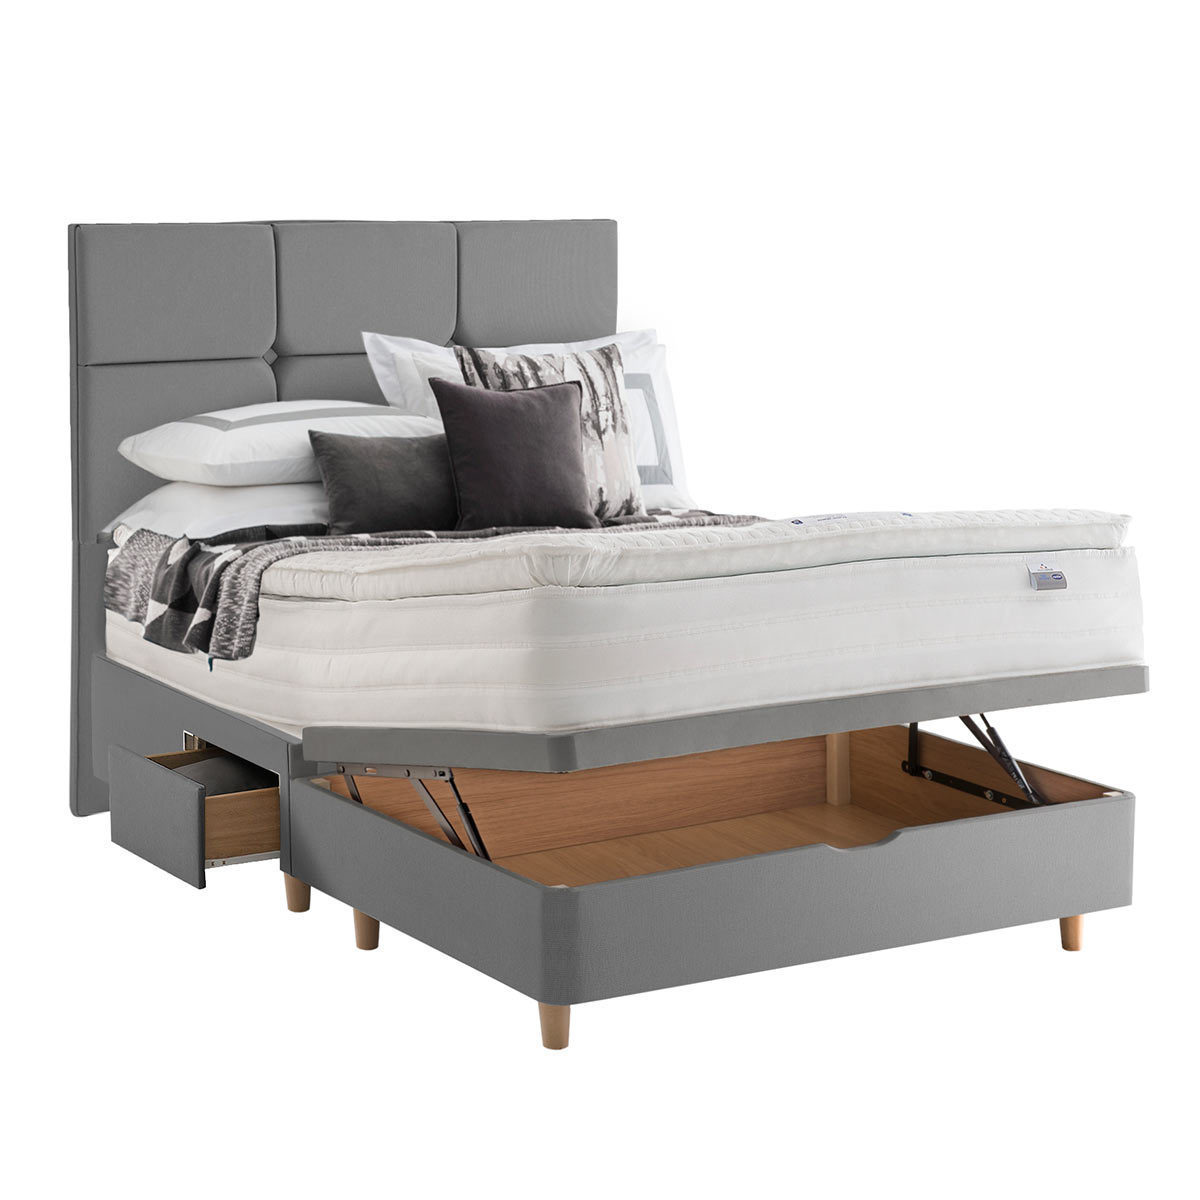 Cut out image of slate divan and headboard with mattress (not included) ottoman open